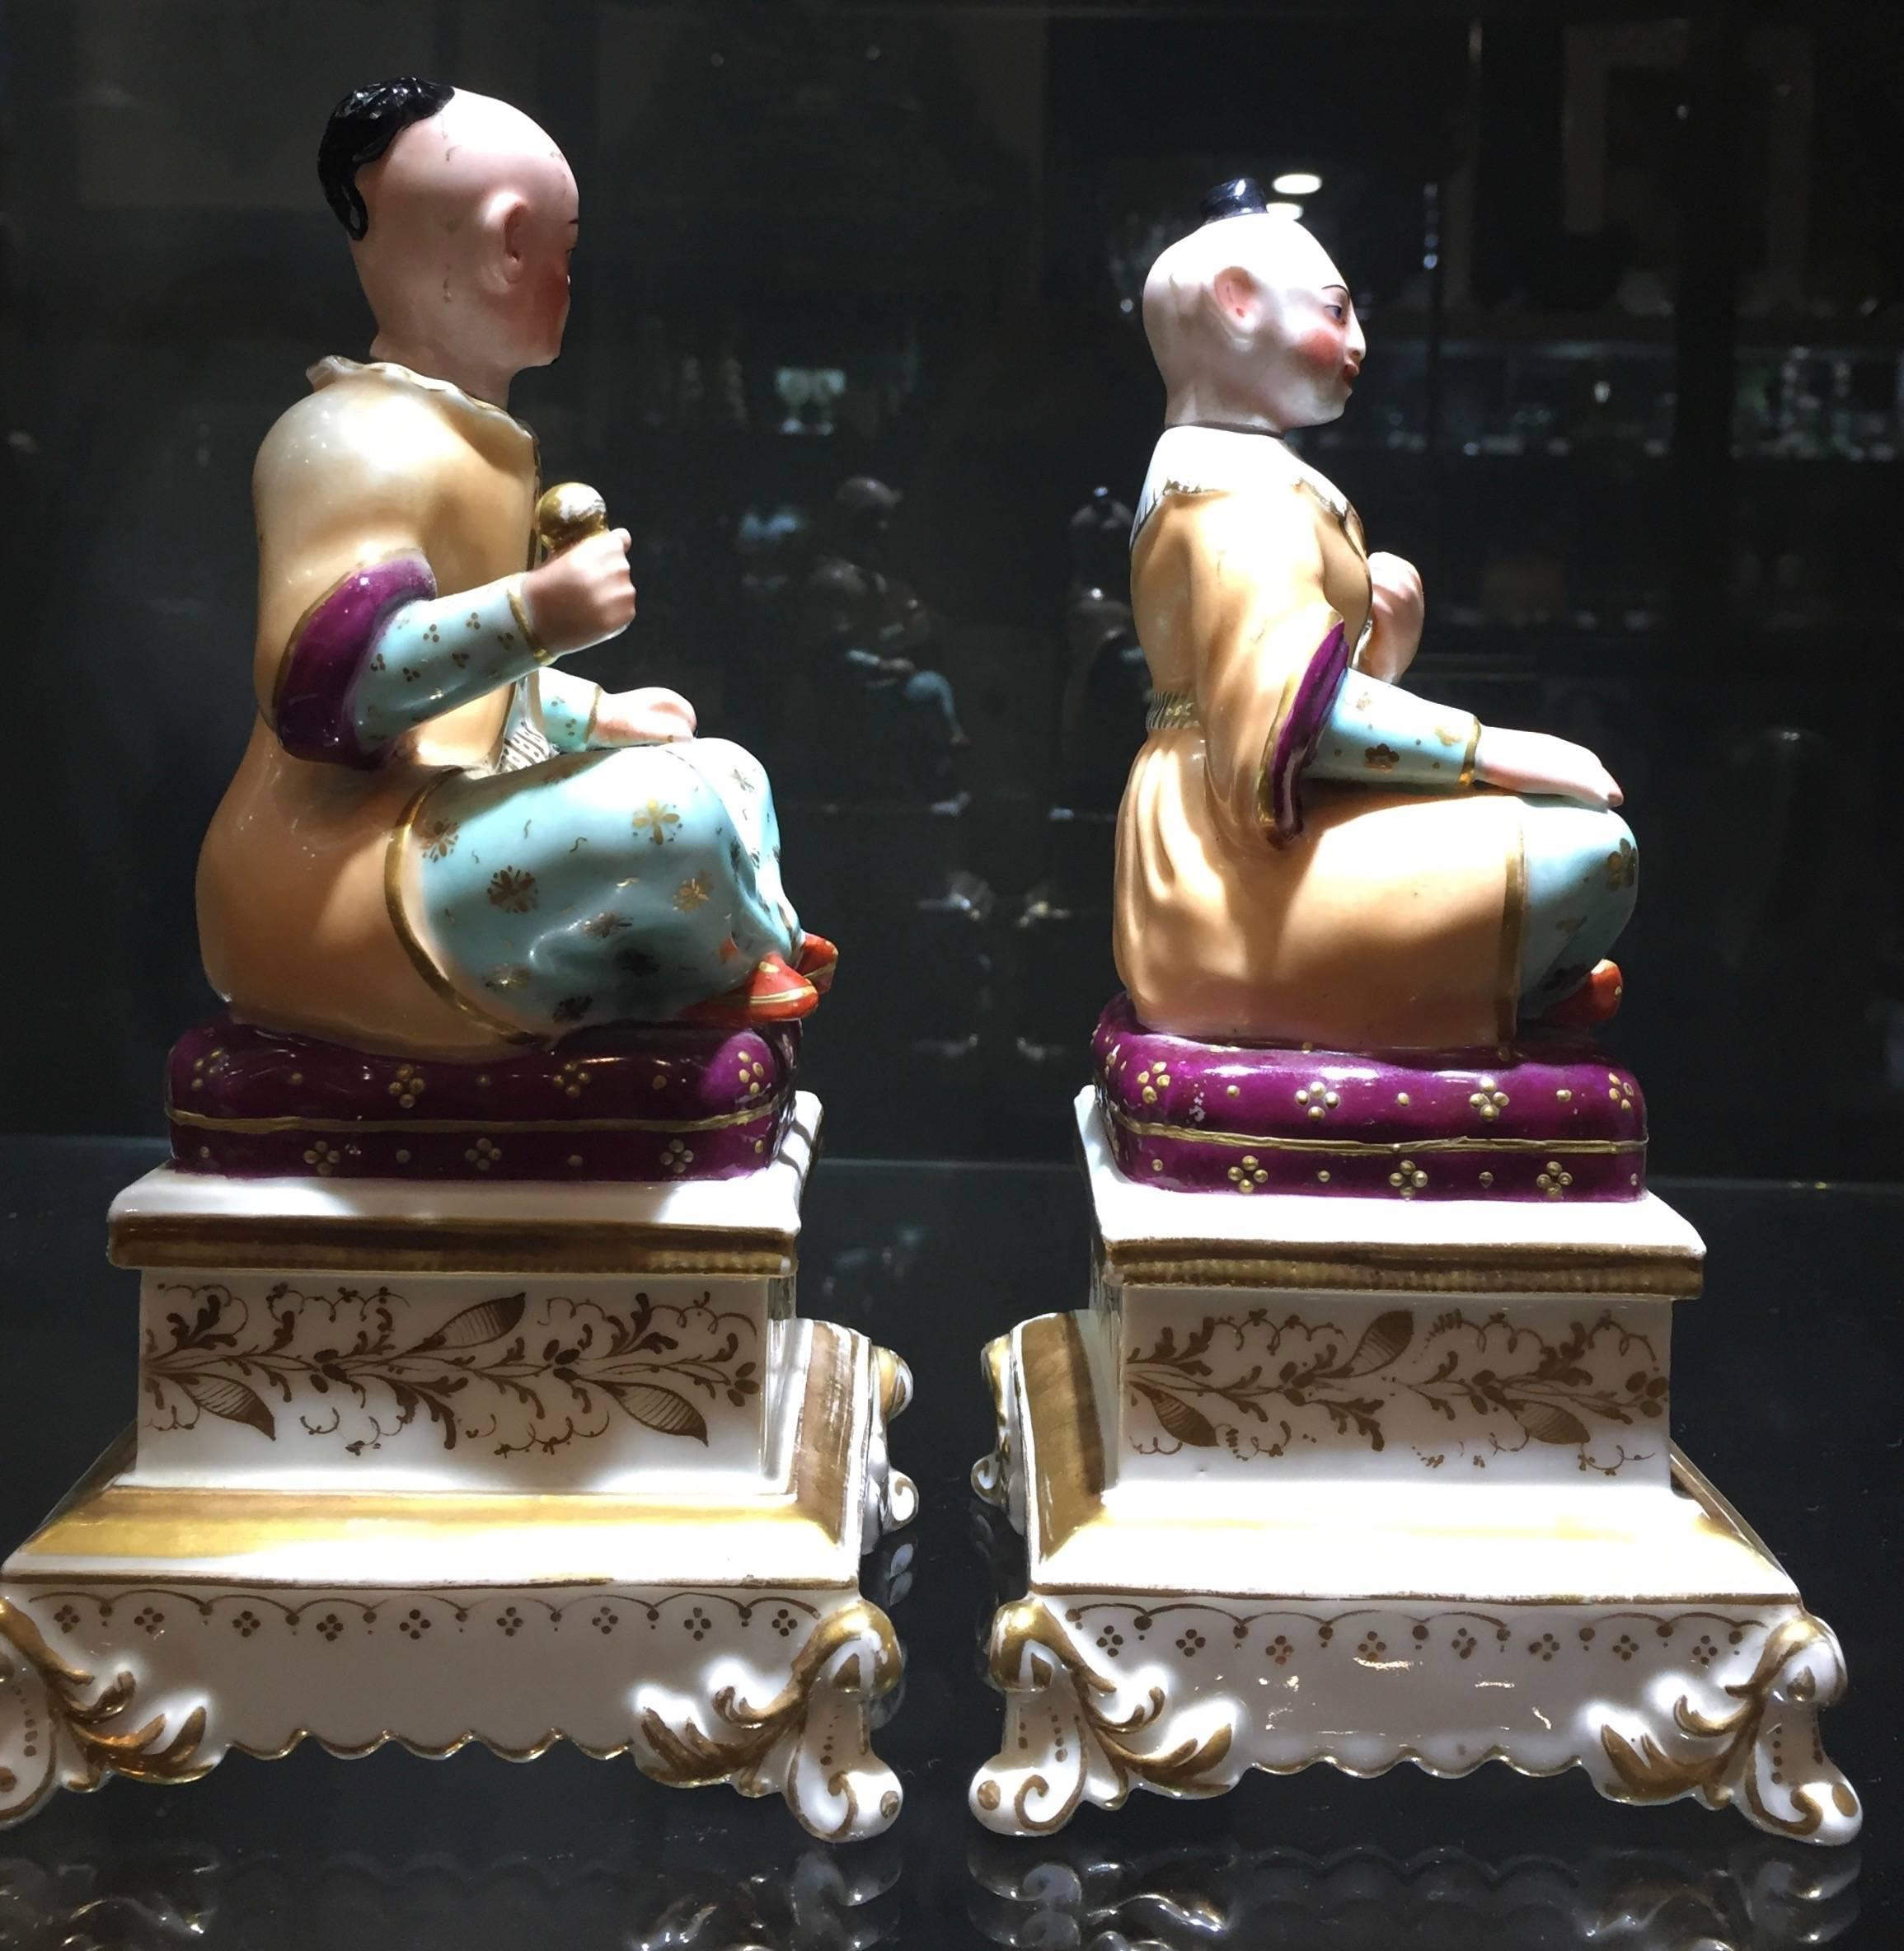 Chinoiserie pair of French 19th century porcelain perfume bottles, the heads are the stoppers, signed under the glaze.
Paris, circa 1900.